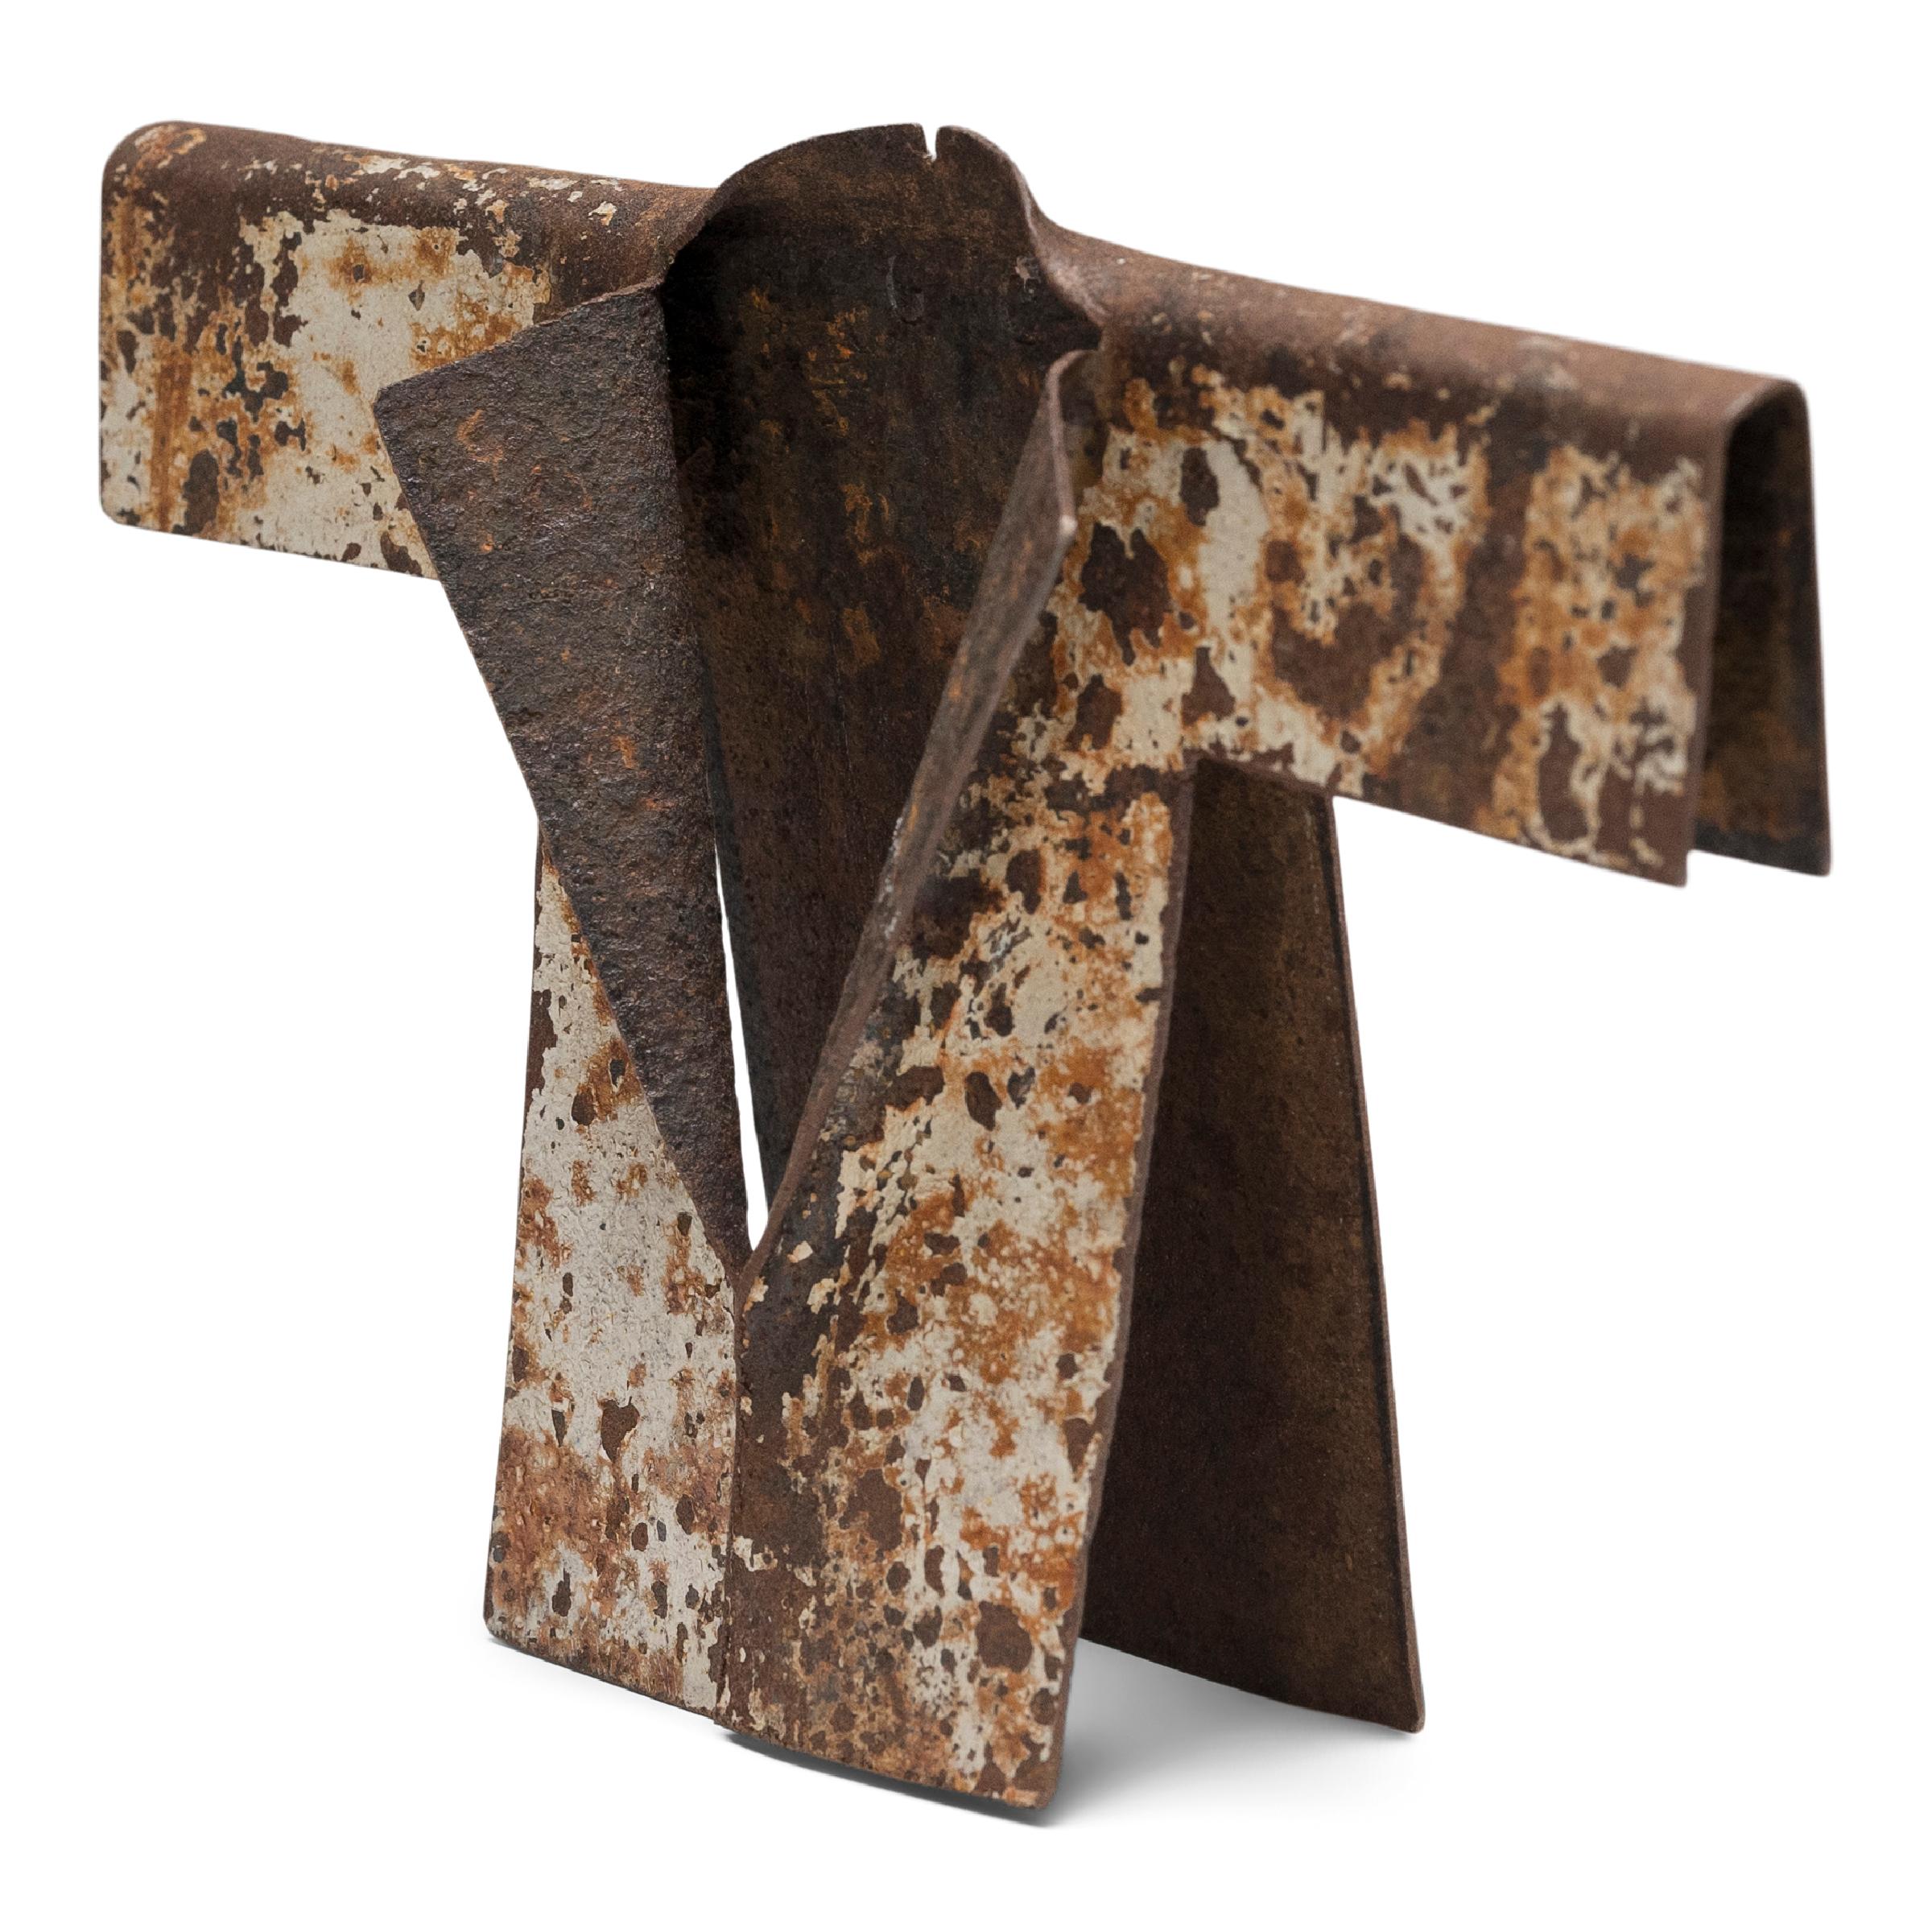 Upon discovering a weathered steel drum that had been warped to resemble the sleeve of a garment, artist Gordon Chandler was inspired to embark on a series of kimono sculptures formed from found metal scraps. With an eye to the aesthetic